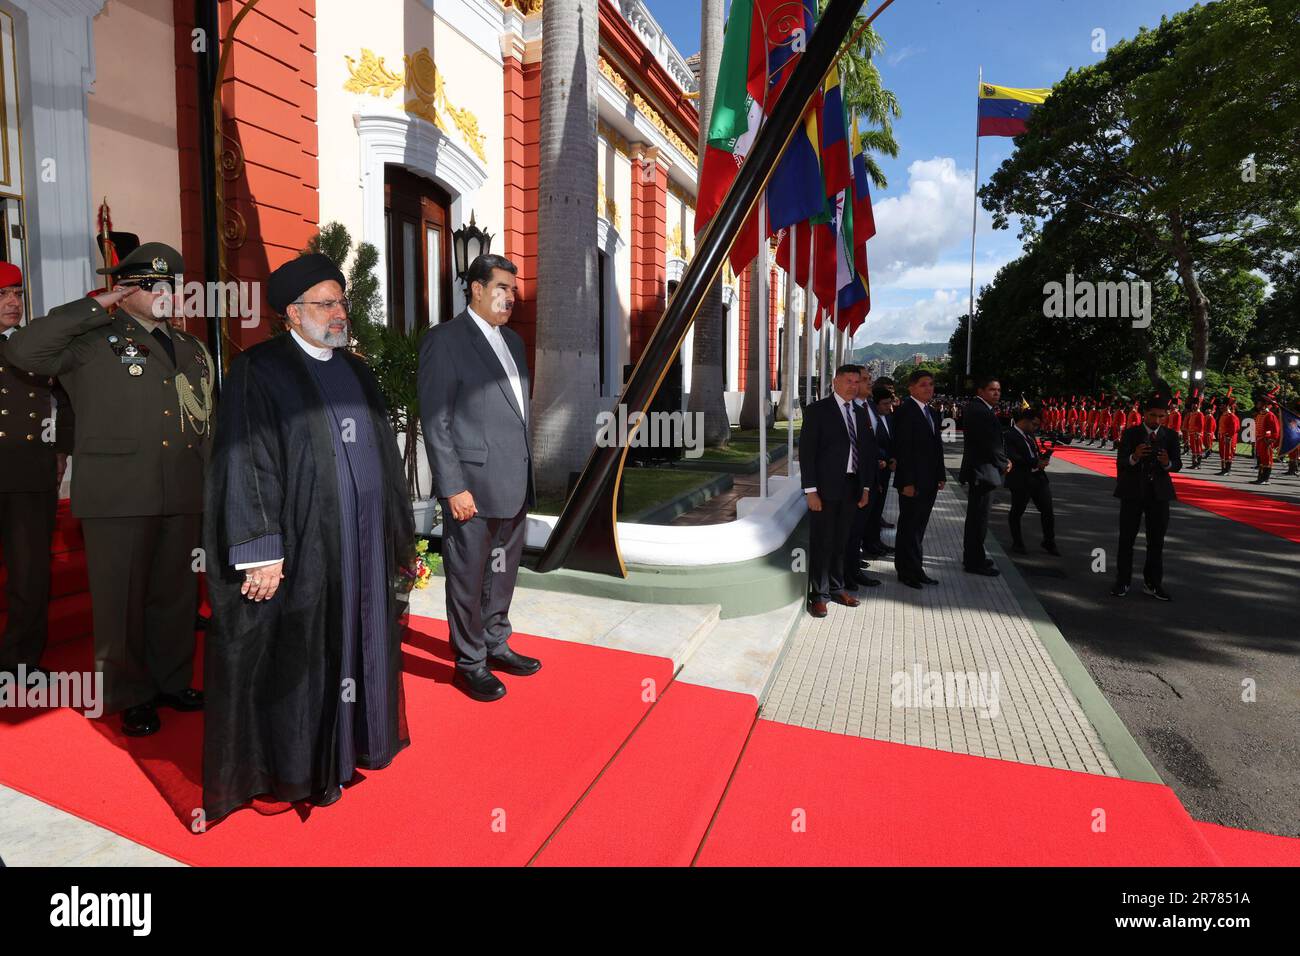 June 12, 2023, Caracas, Tehran, Venezuela: The president of Venezuela, NICOLAS MADURO (R), receives the president of Iran, EBRAHIM RAISI (C), at the presidential palace of Miraflores. Raisi landed this 12 June in Venezuela, at the Simon Bolivar International Airport, in Maiquetia, which serves Caracas, where he was received with honors by a delegation headed by Venezuelan Foreign Minister Yvan Gil. Venezuela is the first stop for the Iranian president on his tour of Latin America, which also includes Cuba and Nicaragua. (Credit Image: © Iranian Presidency via ZUMA Press Wire) EDITORIAL USAGE O Stock Photo